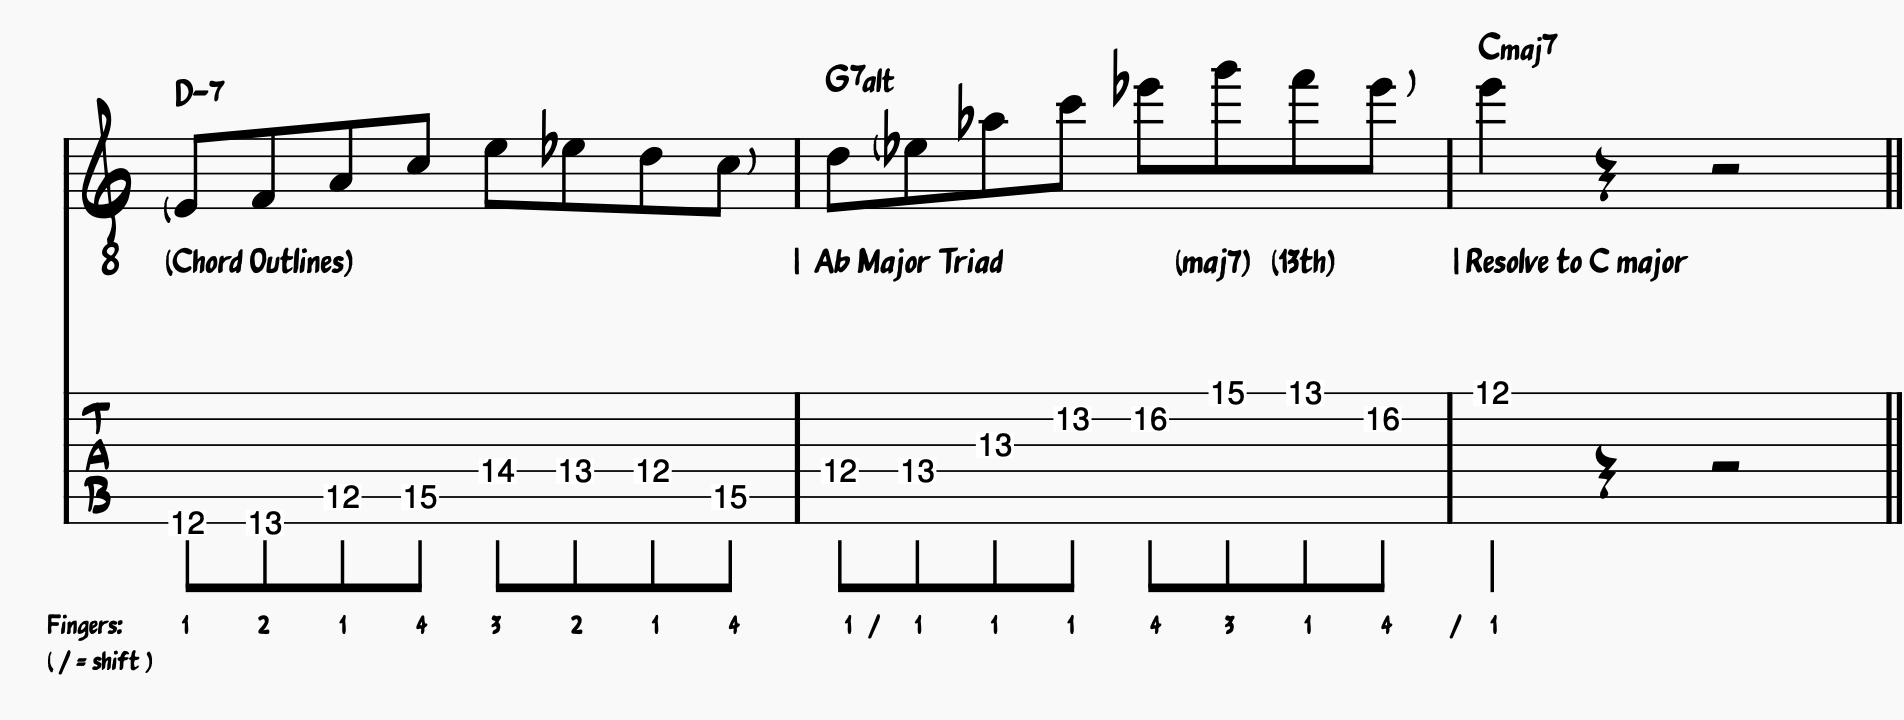 Jazz Guitar Lick 4: non-diatonic triads over the dominant chord